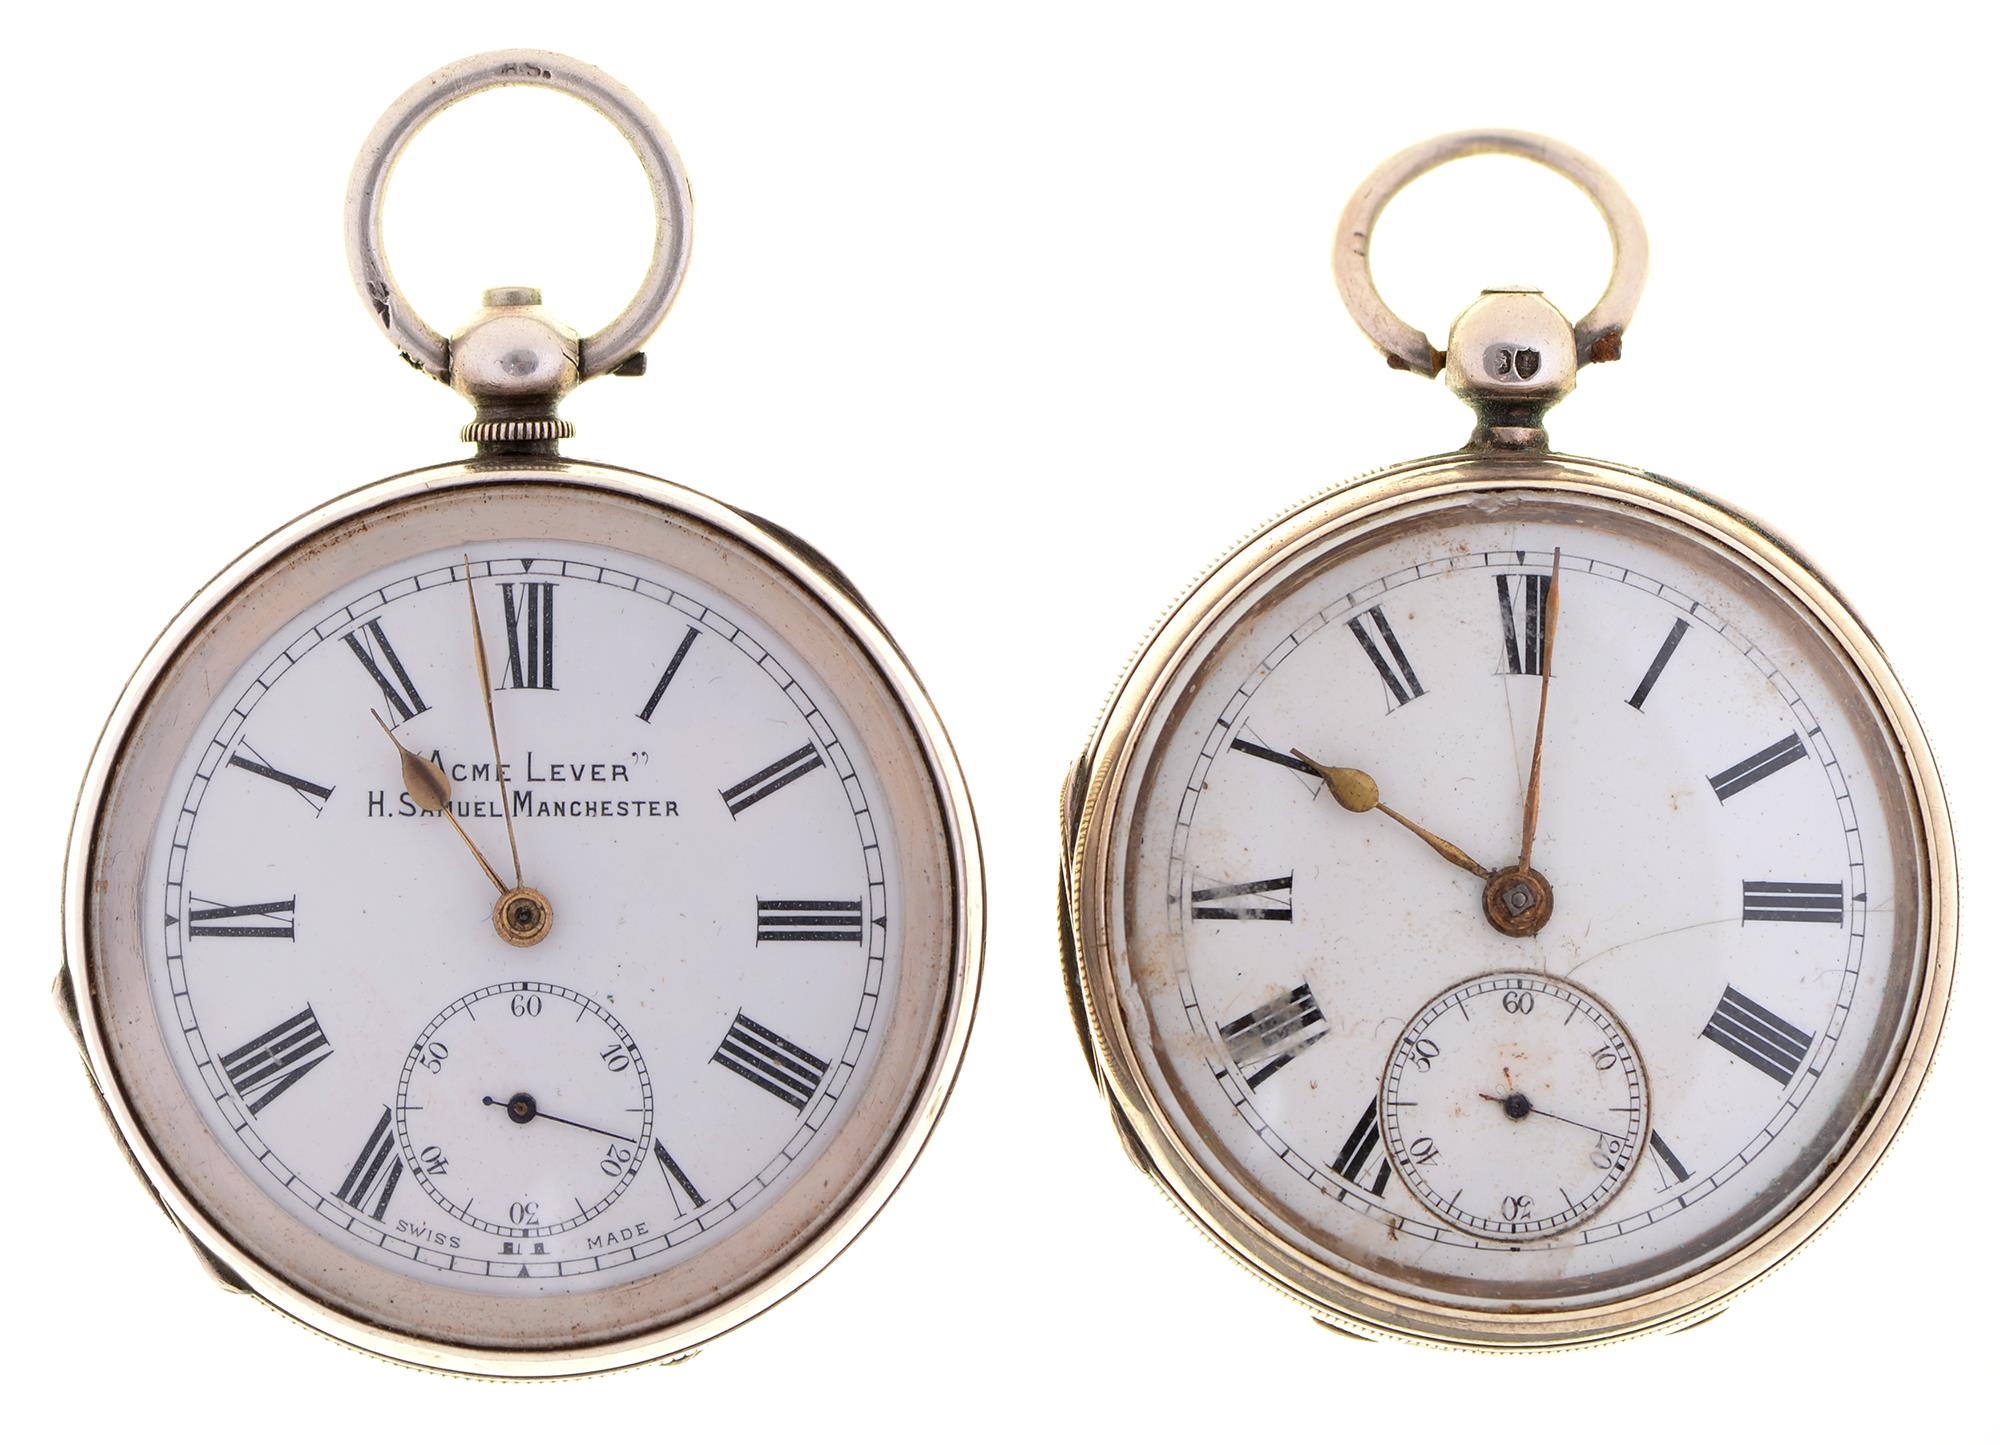 Two silver lever watches, H H Burton, Leicester, No 31201 and H Samuel Manchester "Acme Lever", with